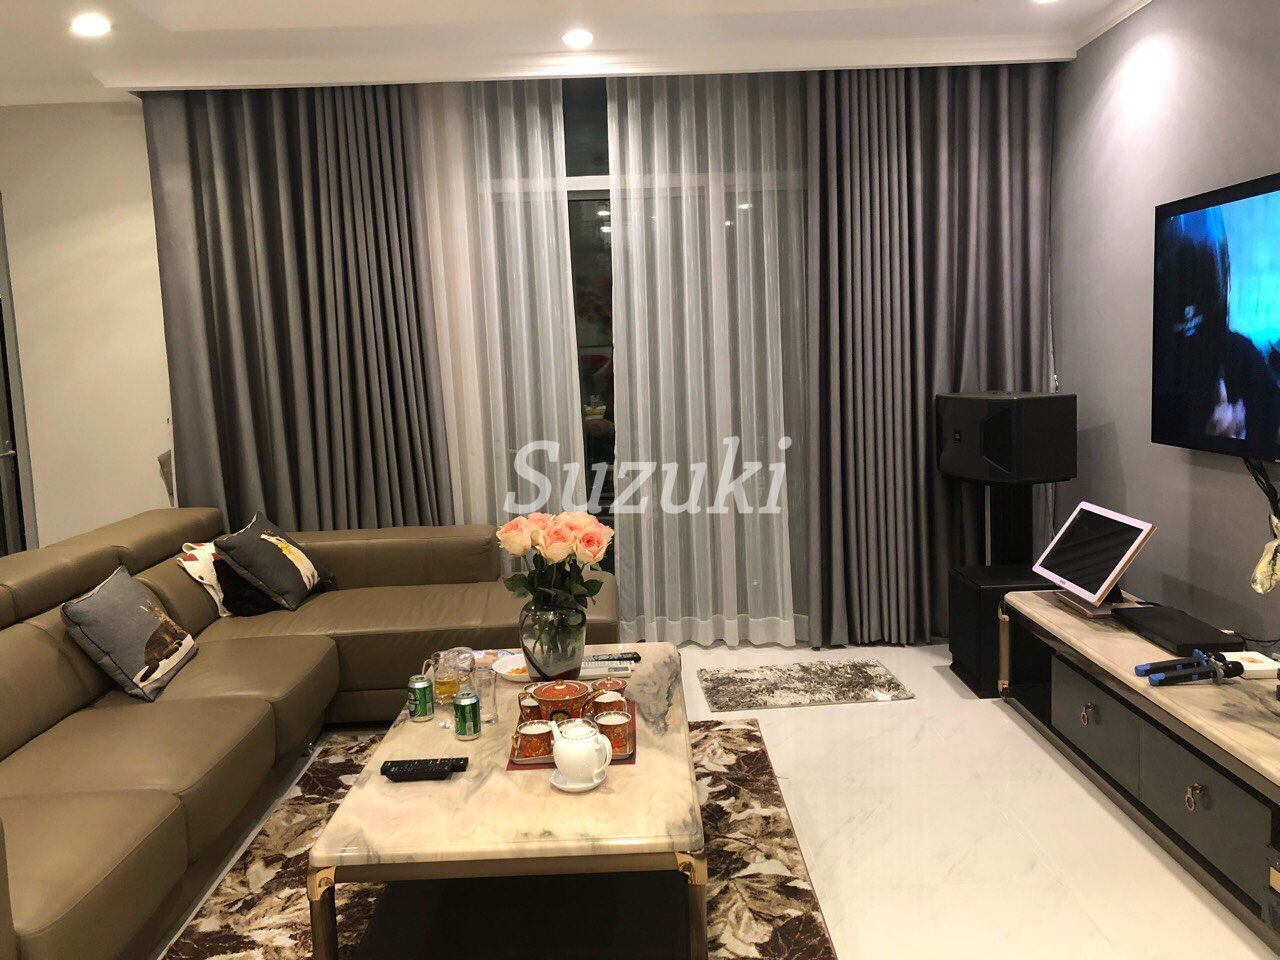 Binhomes Central Park located in Bintan District, Ho Chi Minh | 4LDK for rent 133 square meters-2100$-ST1051081